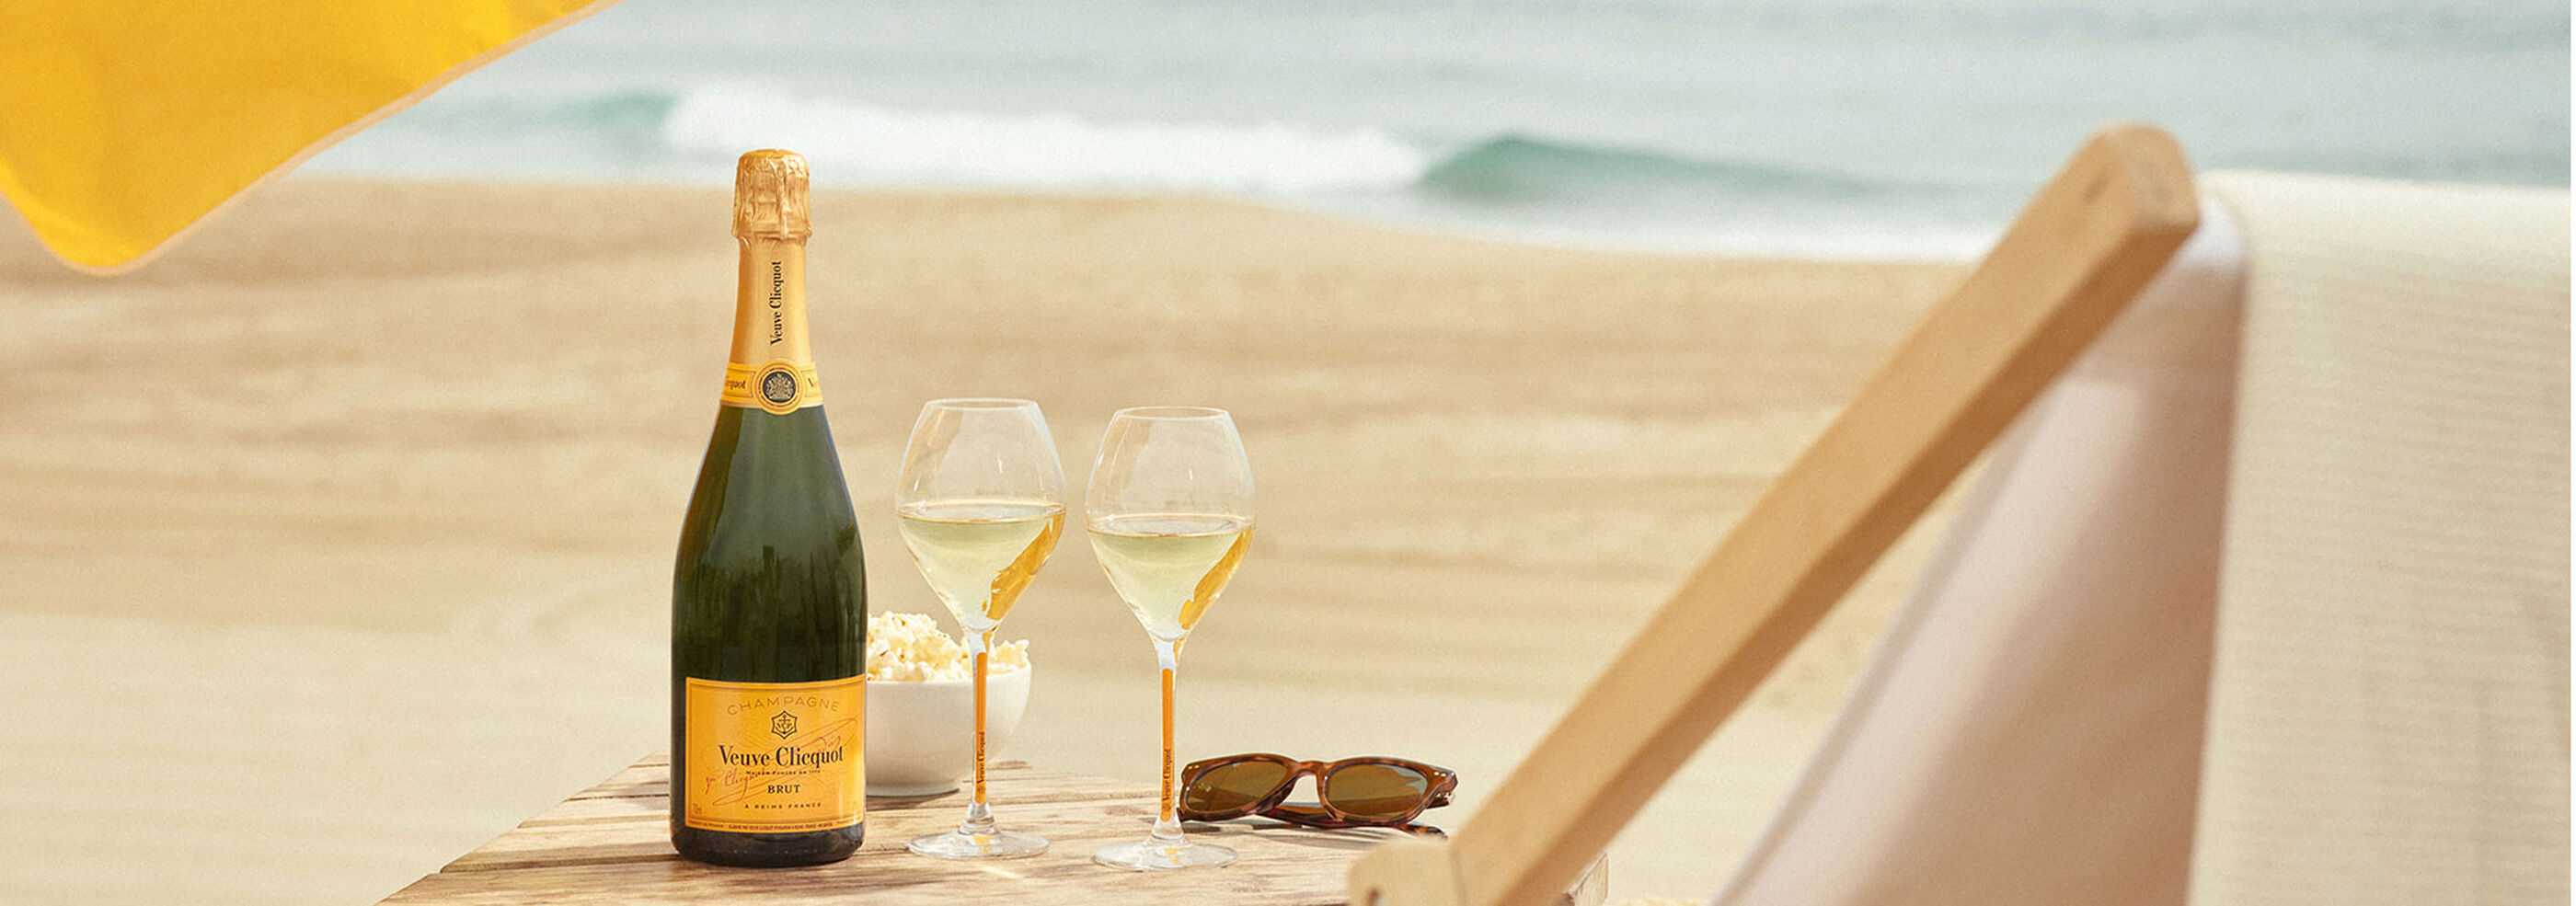 Veuve bottle at beach with glasses and sunglasses